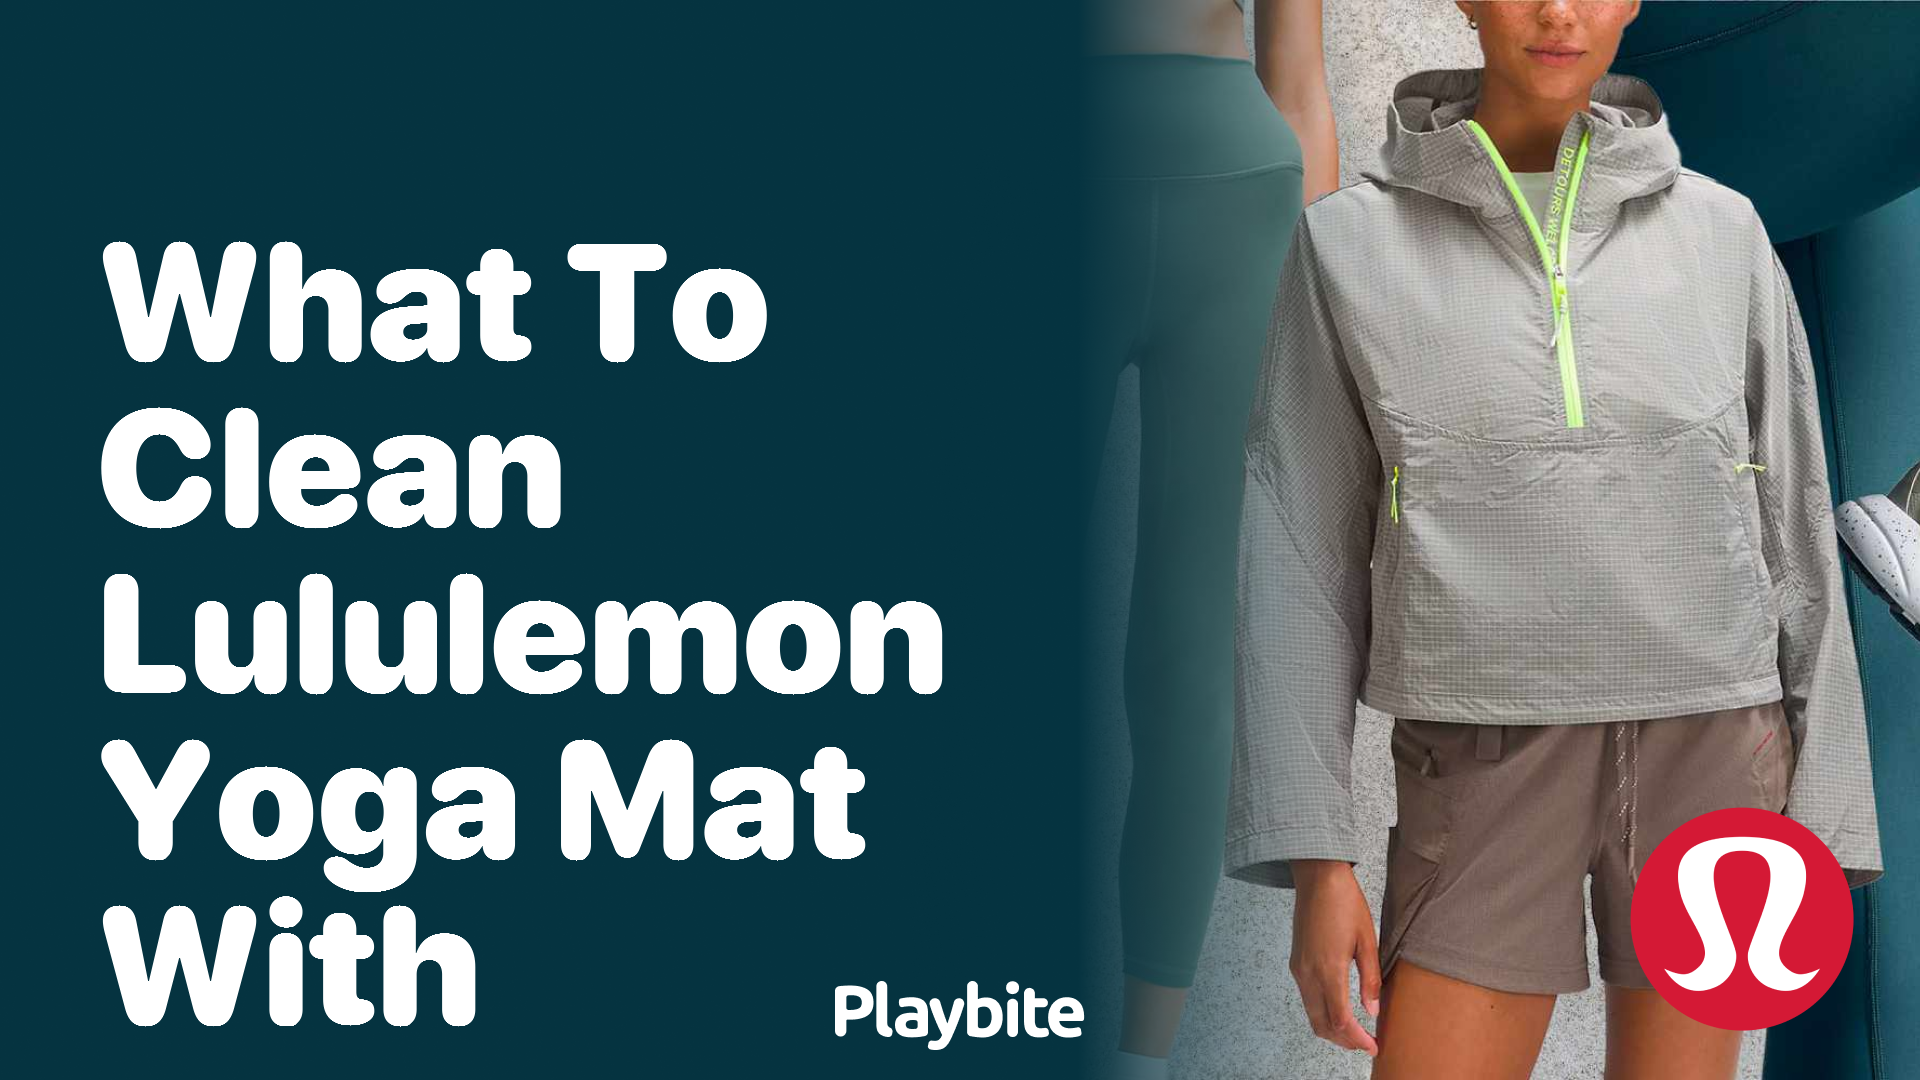 What to Clean Your Lululemon Yoga Mat With - Playbite